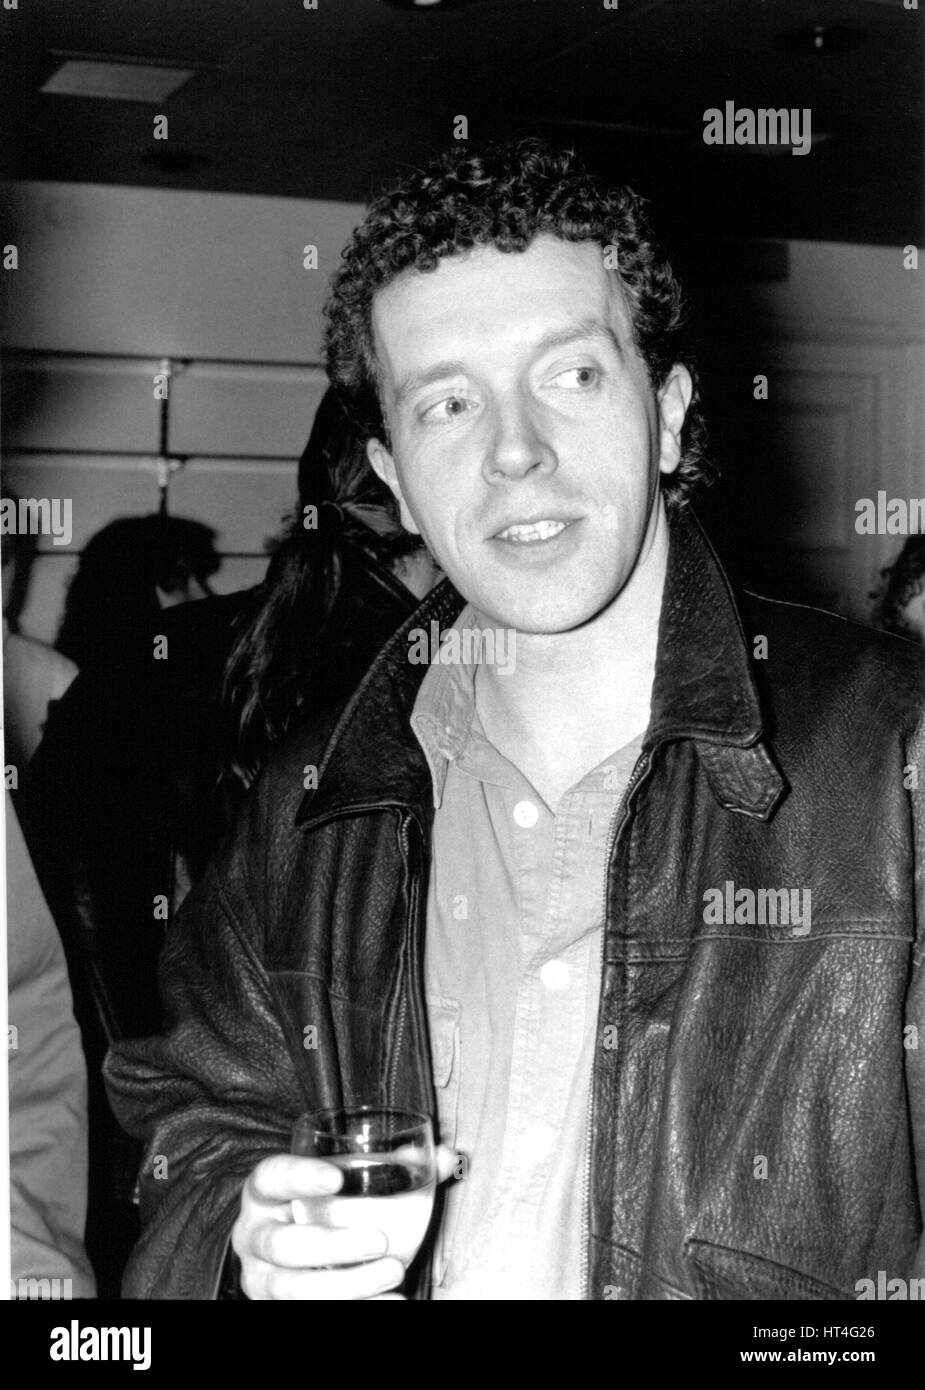 Jim Sweeney, improvisational comedy actor, attends a press launch for the new series of television comedy show Who's Line Is It Anyway? in London, England on January 9, 1991. Stock Photo